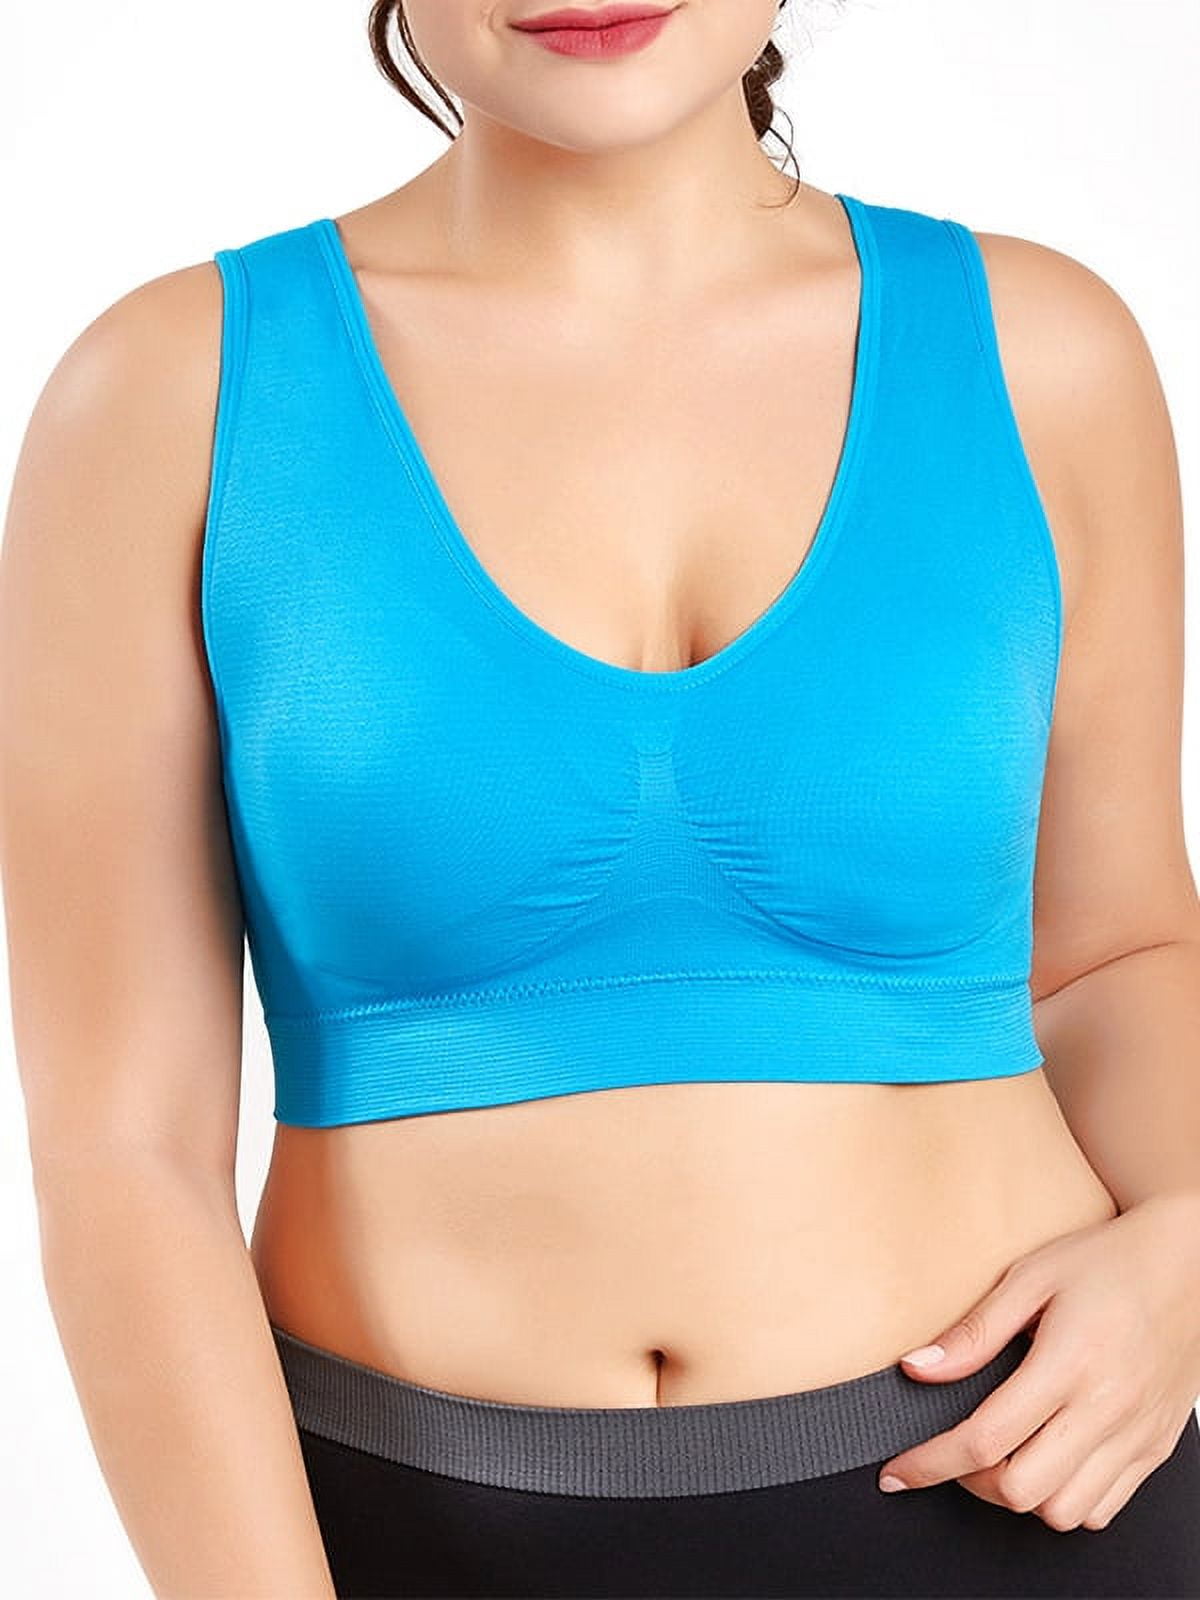 GORHGORH Women's Plus Size S-6XL Underwear Solid Color Quick-drying  Seamless High Stretch Running Fitness Support Sports Bra 